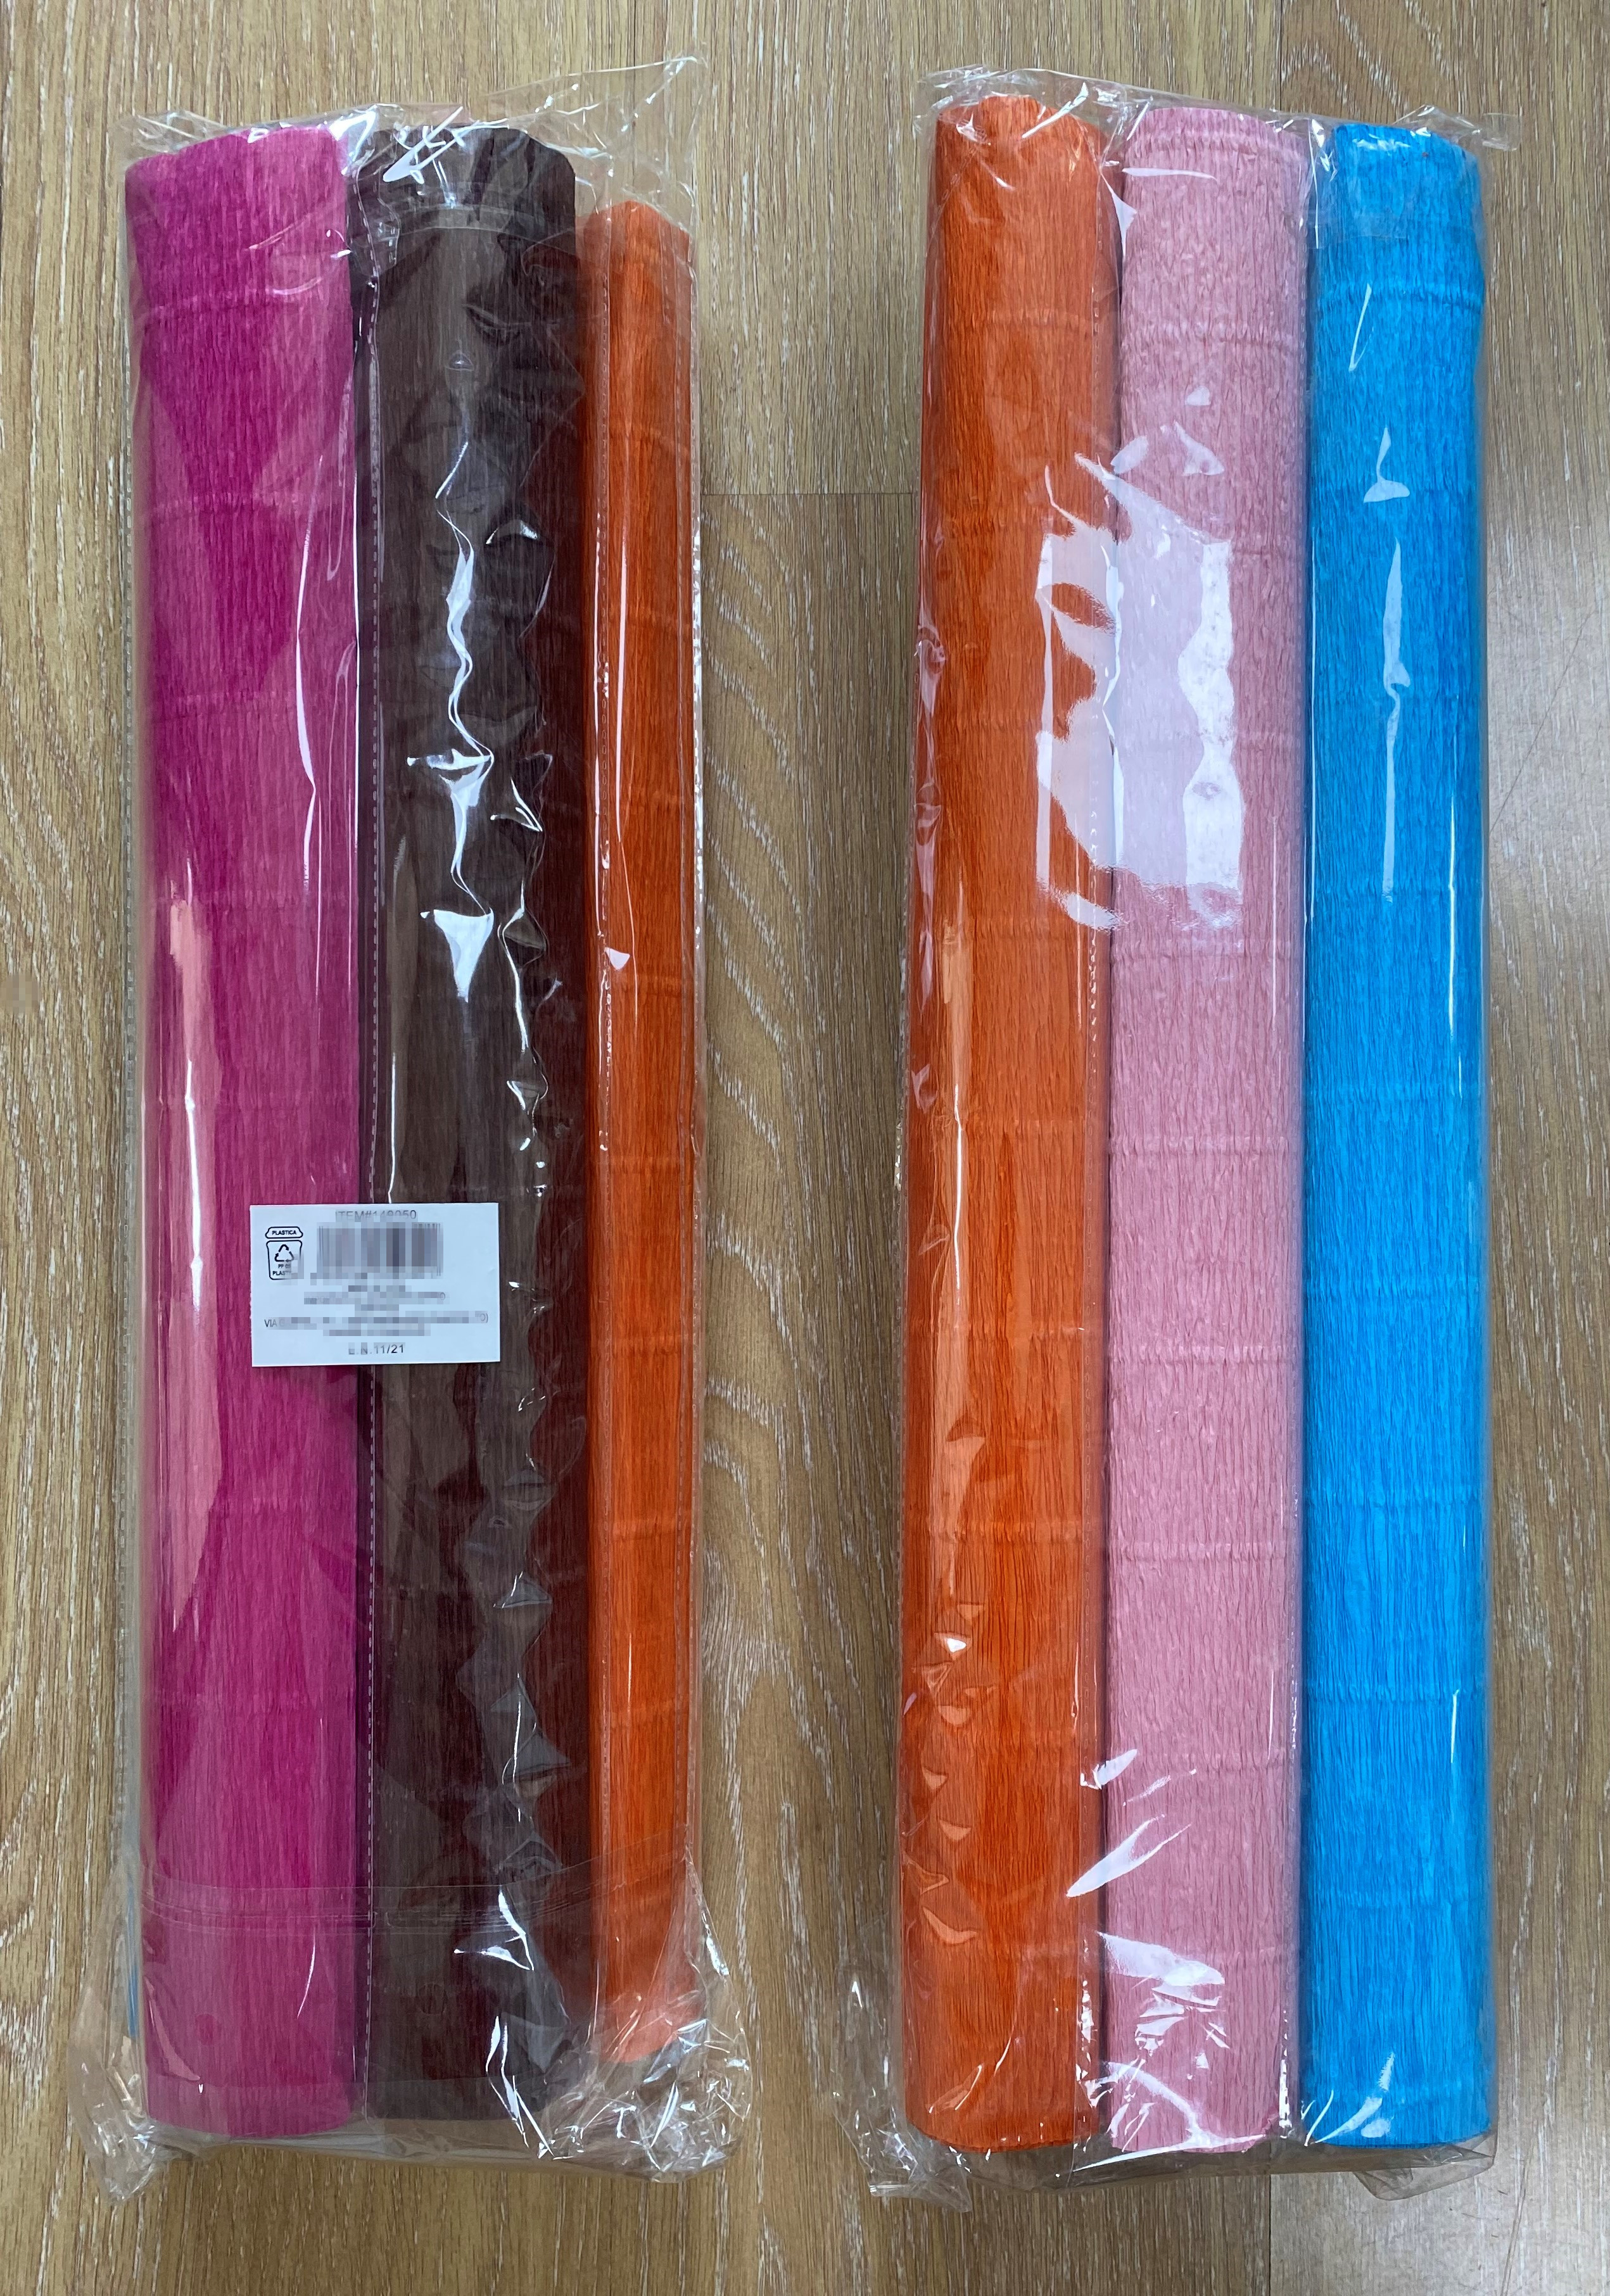 120 GSM Solid Colored crepe paper 200% stretch - 5 Colors Assorted 